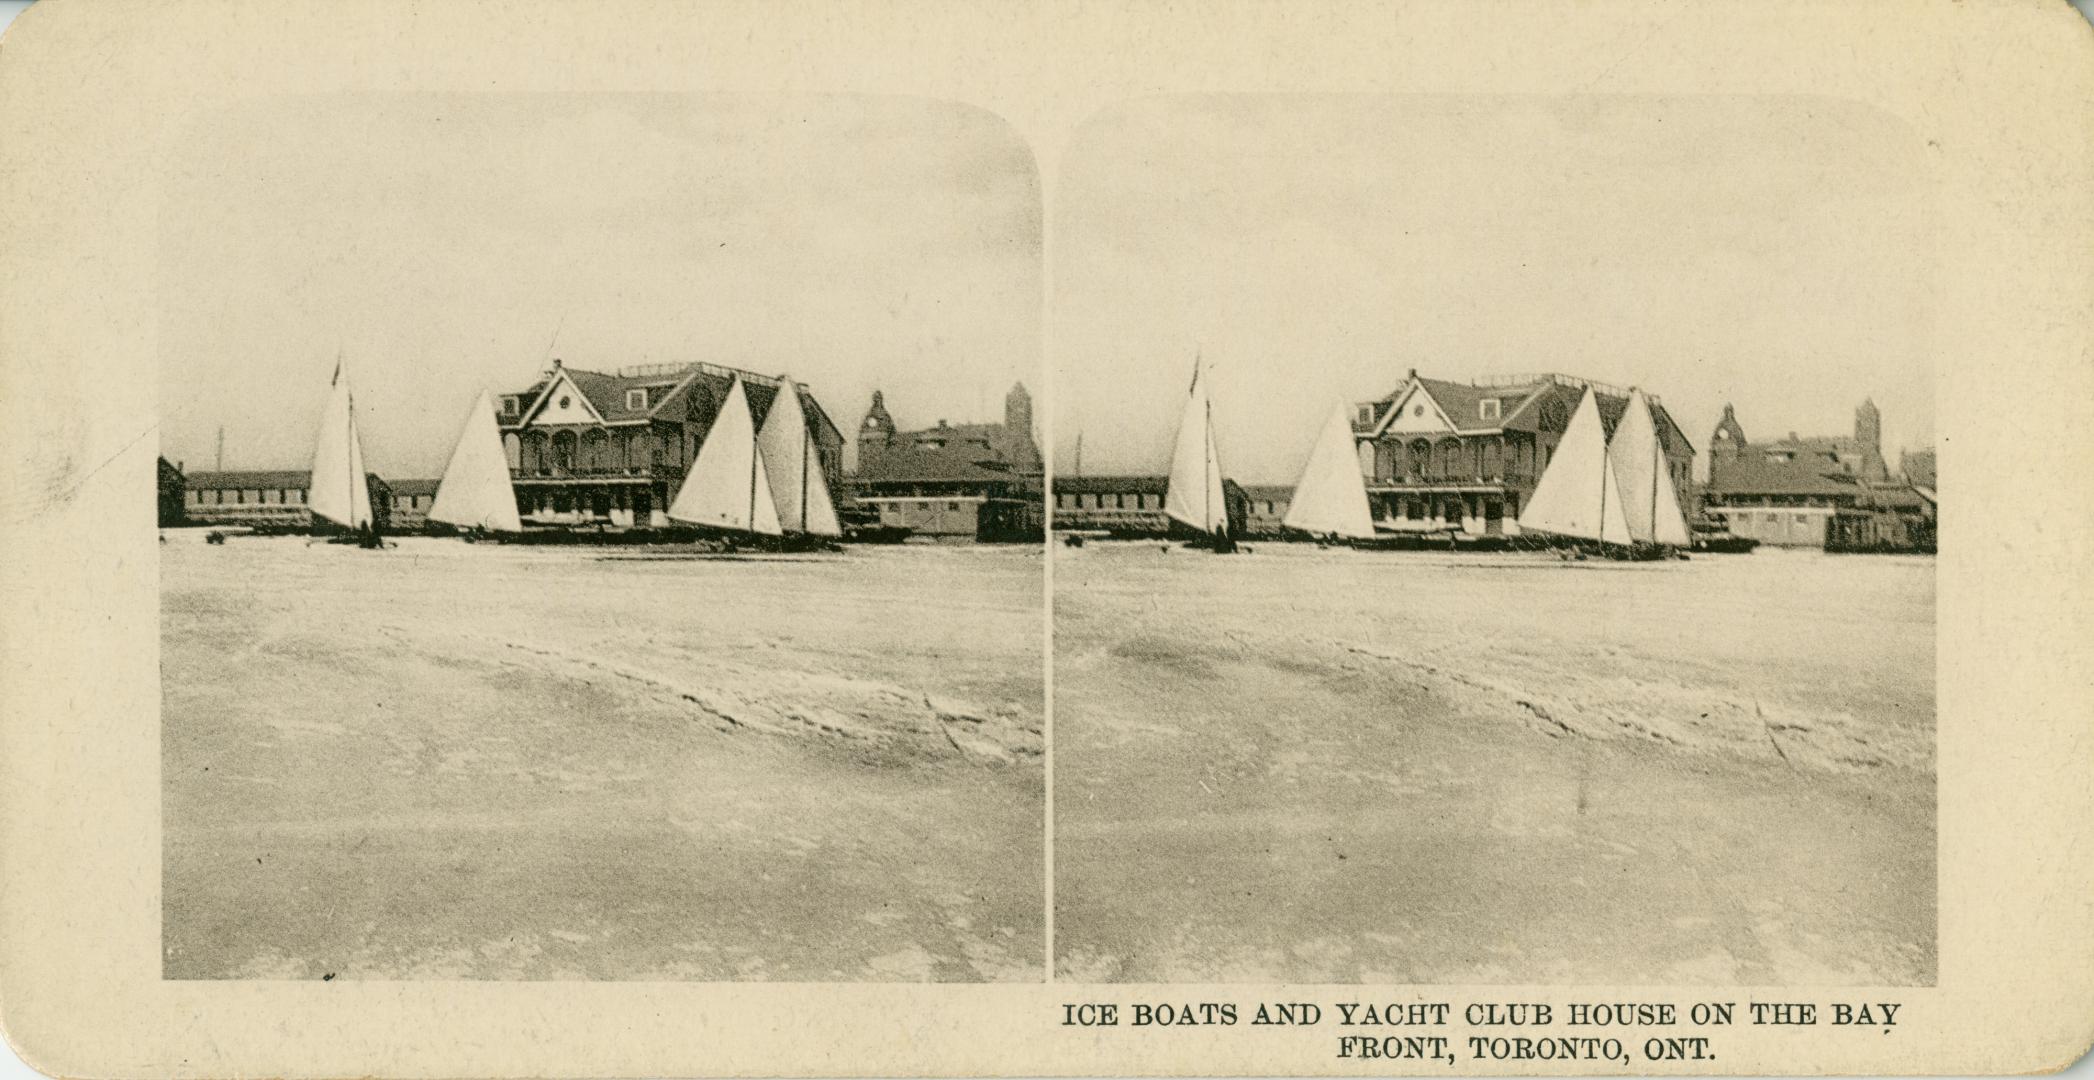 Image contains two pictures of the Yacht Club House and some boats in front of it.